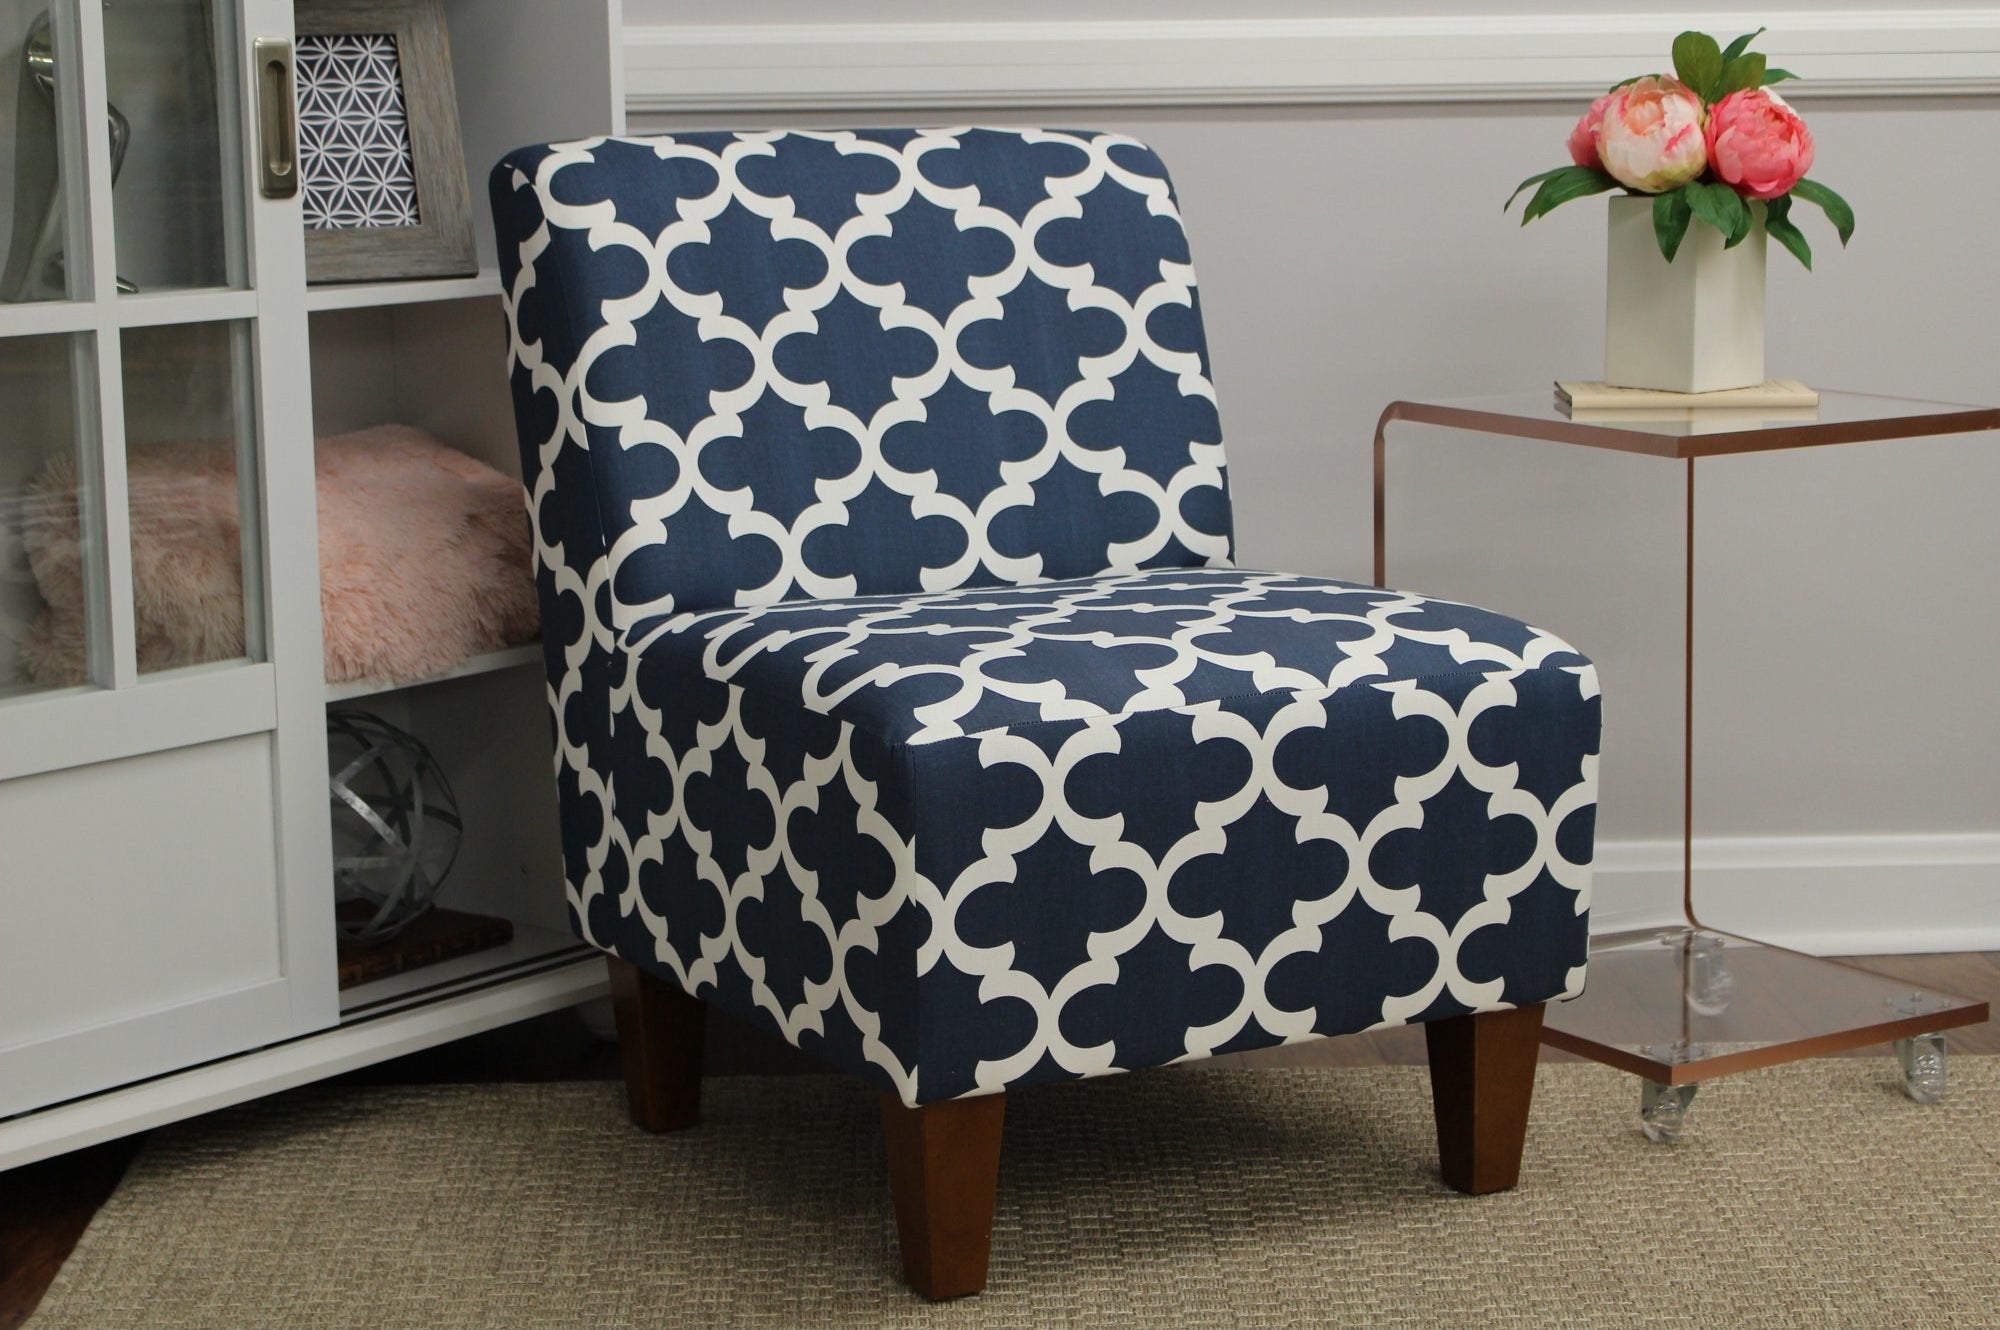 the blue and white patterned chair in a decorated corner